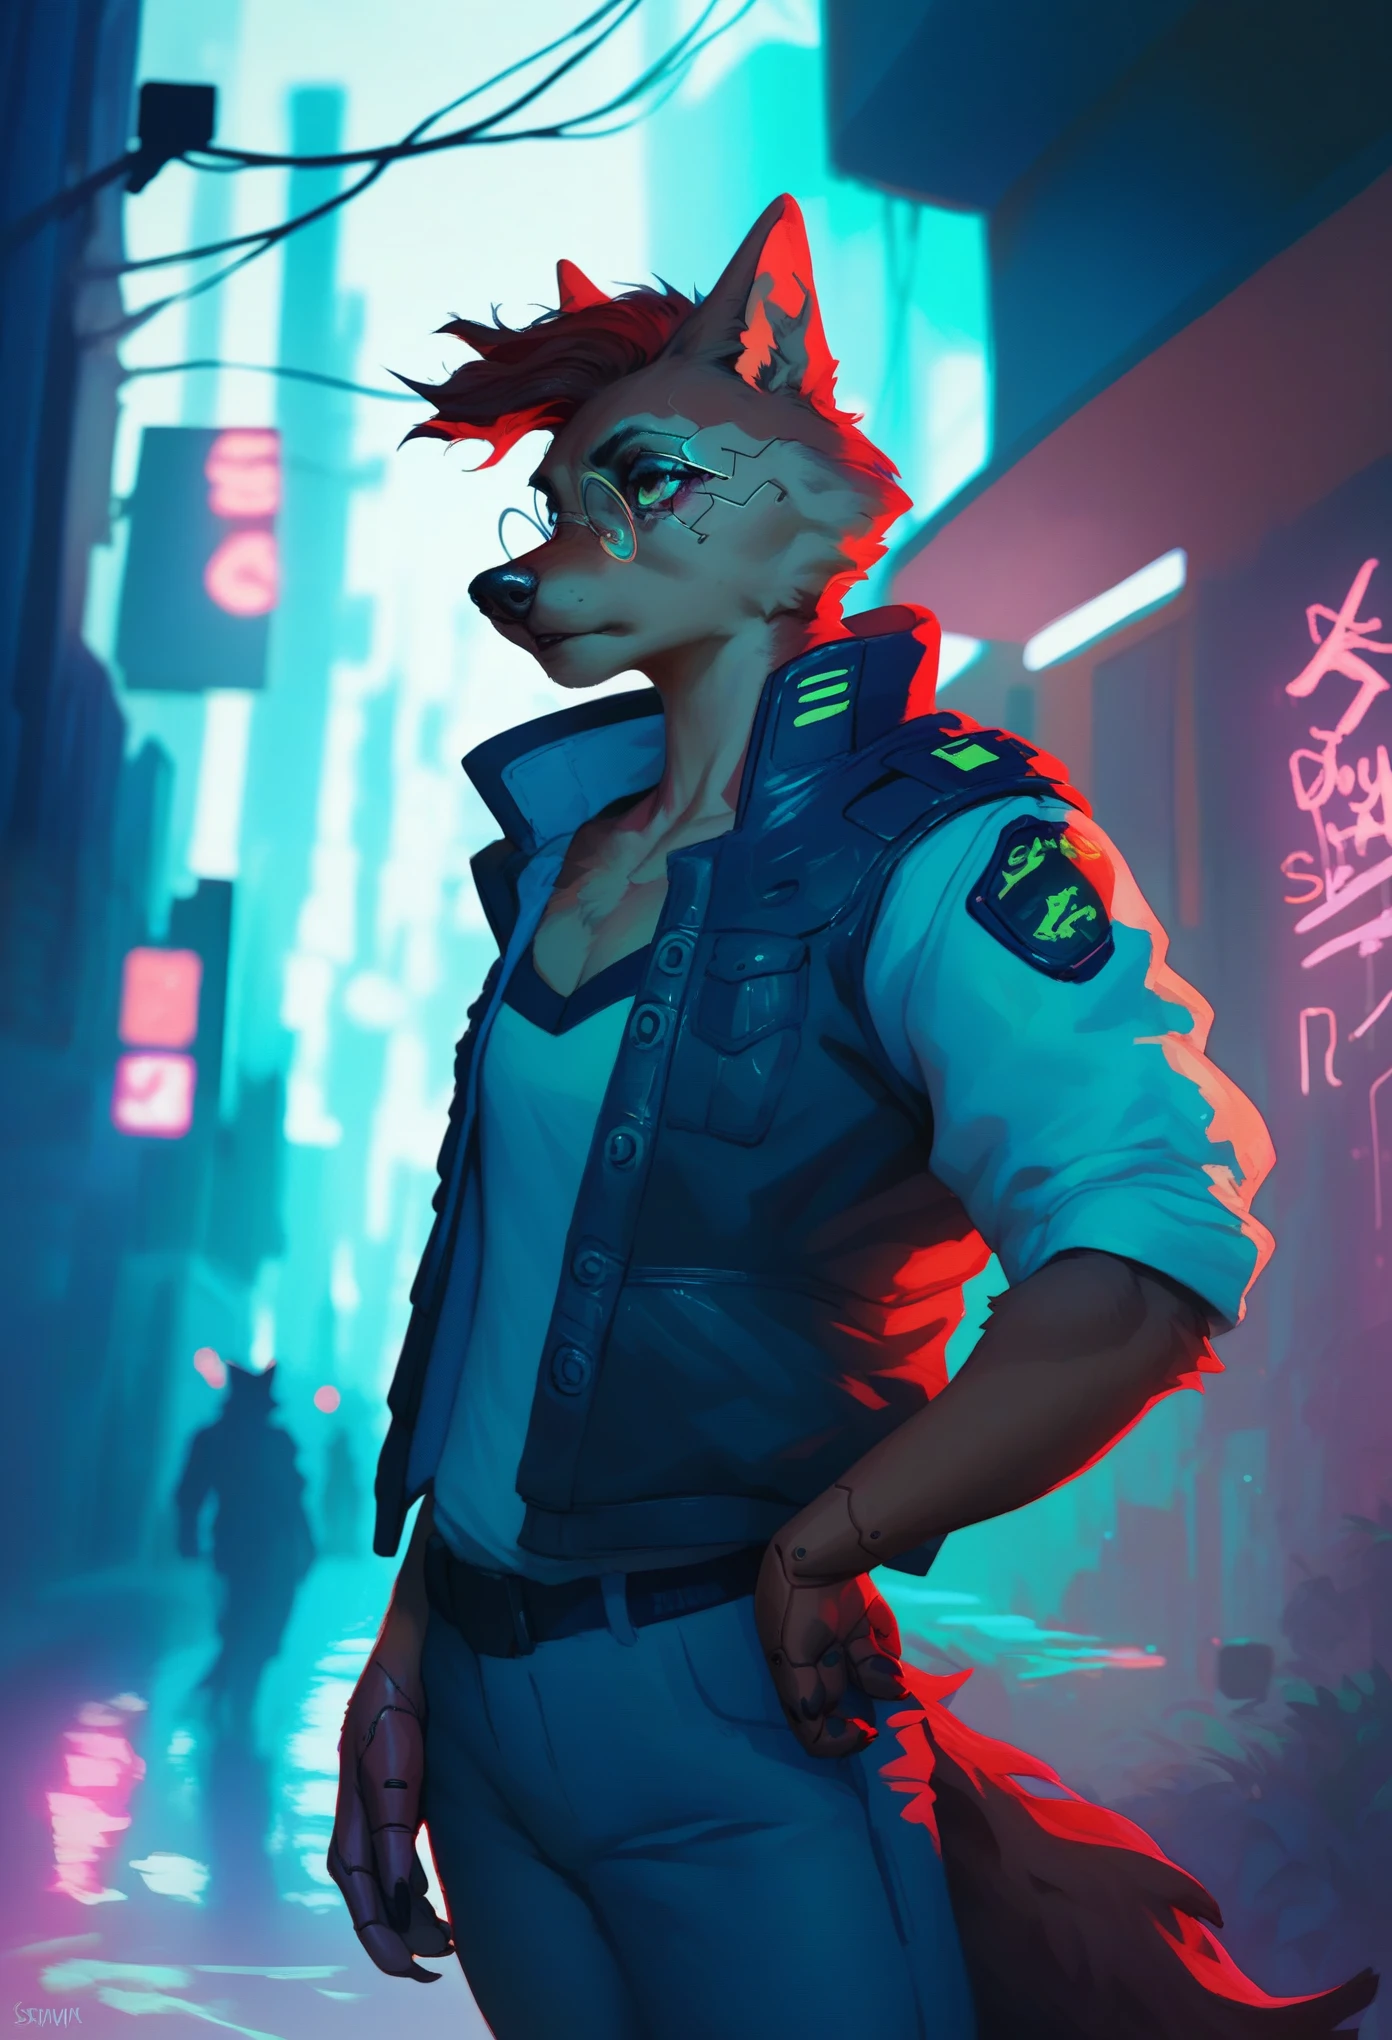 A cyberpunk-style anthropomorphic black wolf police officer, wearing red round glasses and cyberpunk-inspired clothing, standing in a cyberpunk city alley (like Night City) engaged in a shootout. The character should be fully in frame.